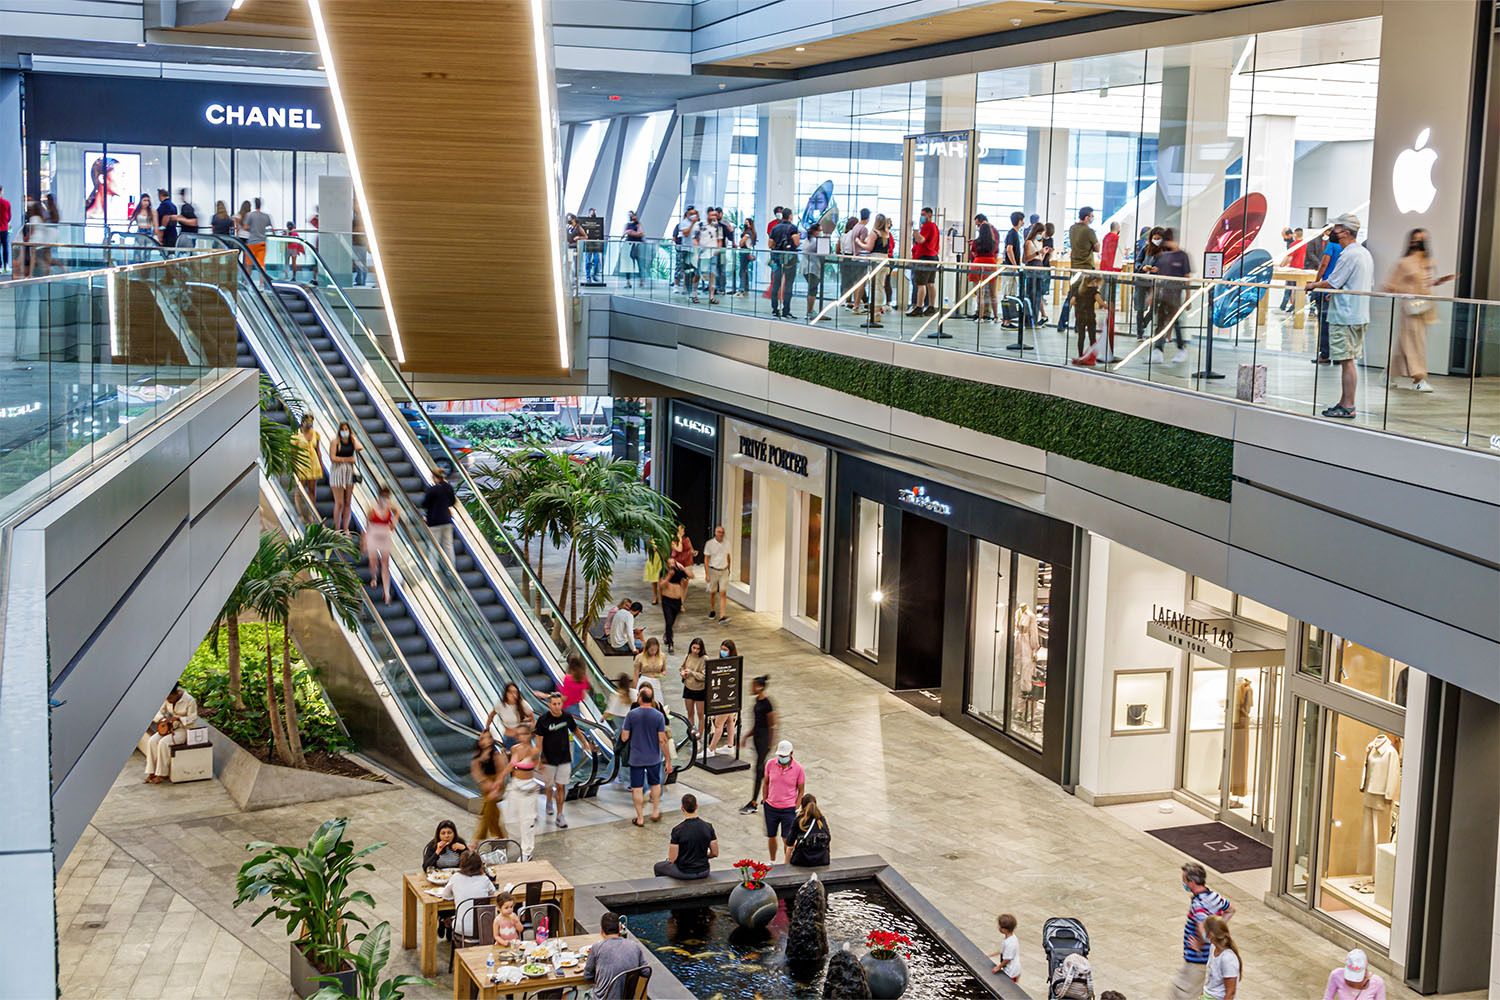 America's most successful malls are worth billions and defying the retail  meltdown with luxury stores and special events - take a look inside